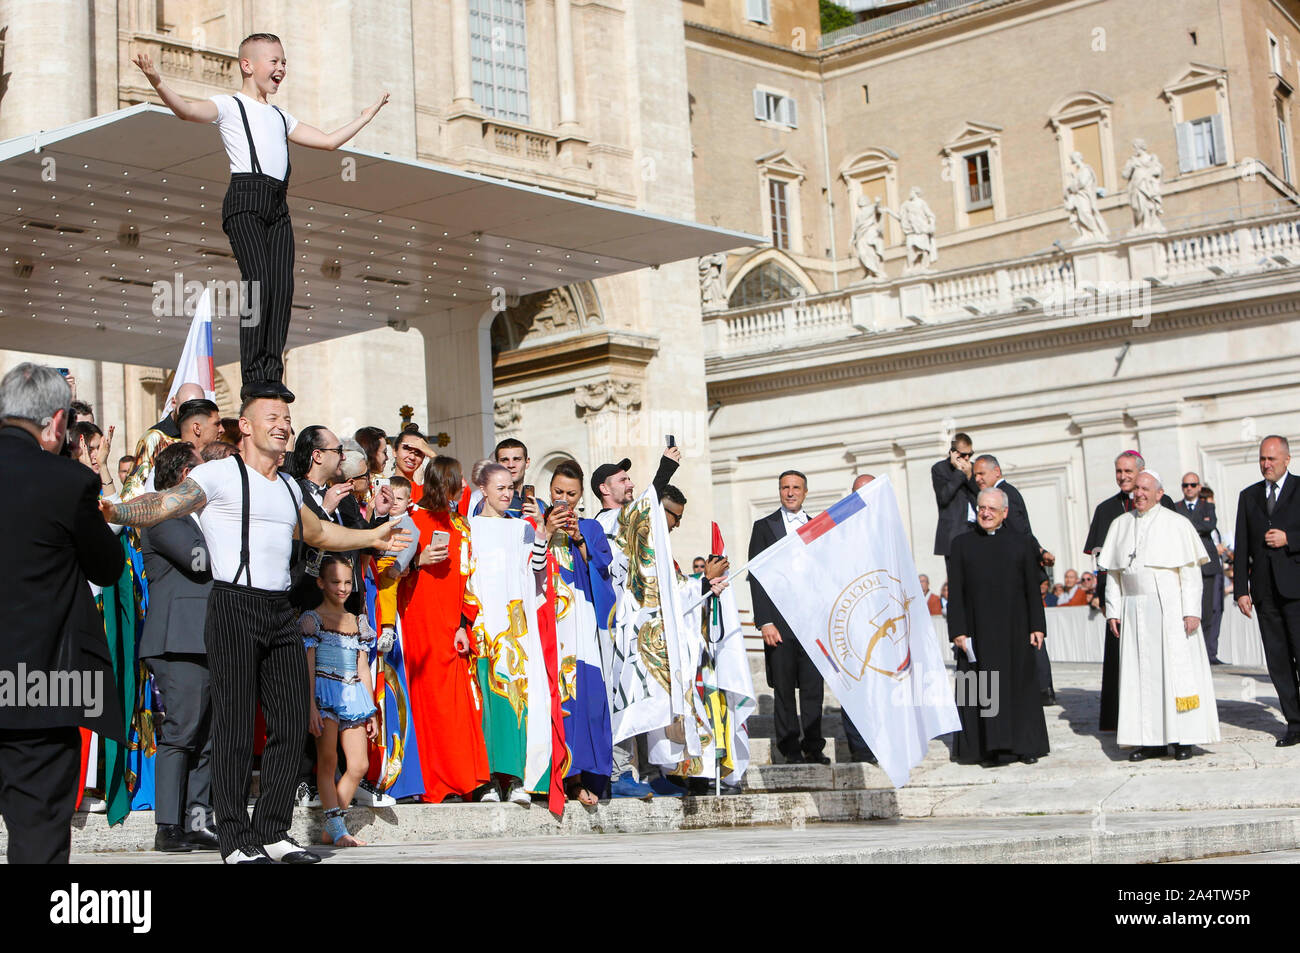 Vatican City, 16th October 2019. Circus artists perform as Pope Francis applauds at the end of the weekly general audience in St. Peter's Square. © Riccardo De Luca UPDATE IMAGES/ Alamy Live News  STRICTLY ONLY FOR EDITORIAL USE Credit: Update Images/Alamy Live News Stock Photo